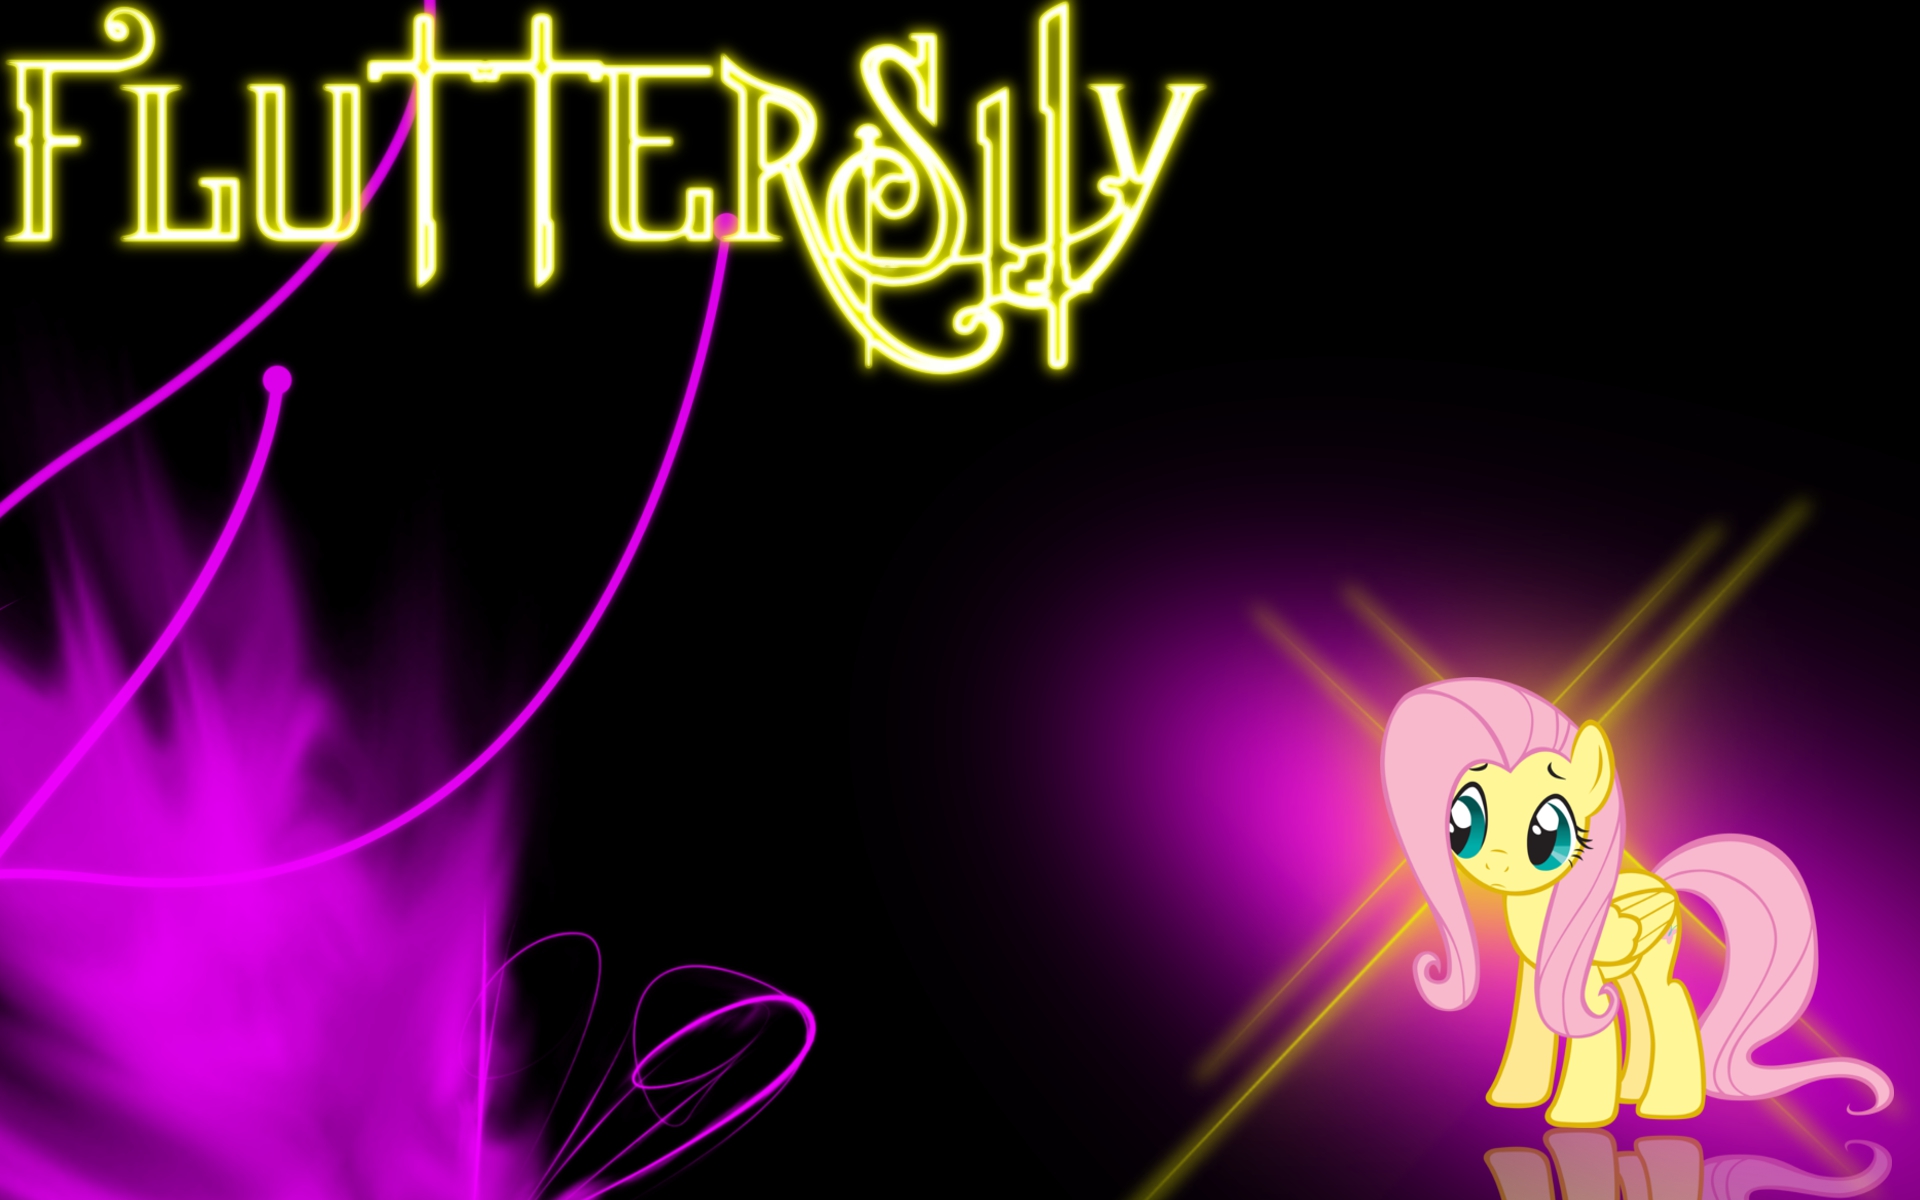 Fluttershy wallpaper by TomppaBrony